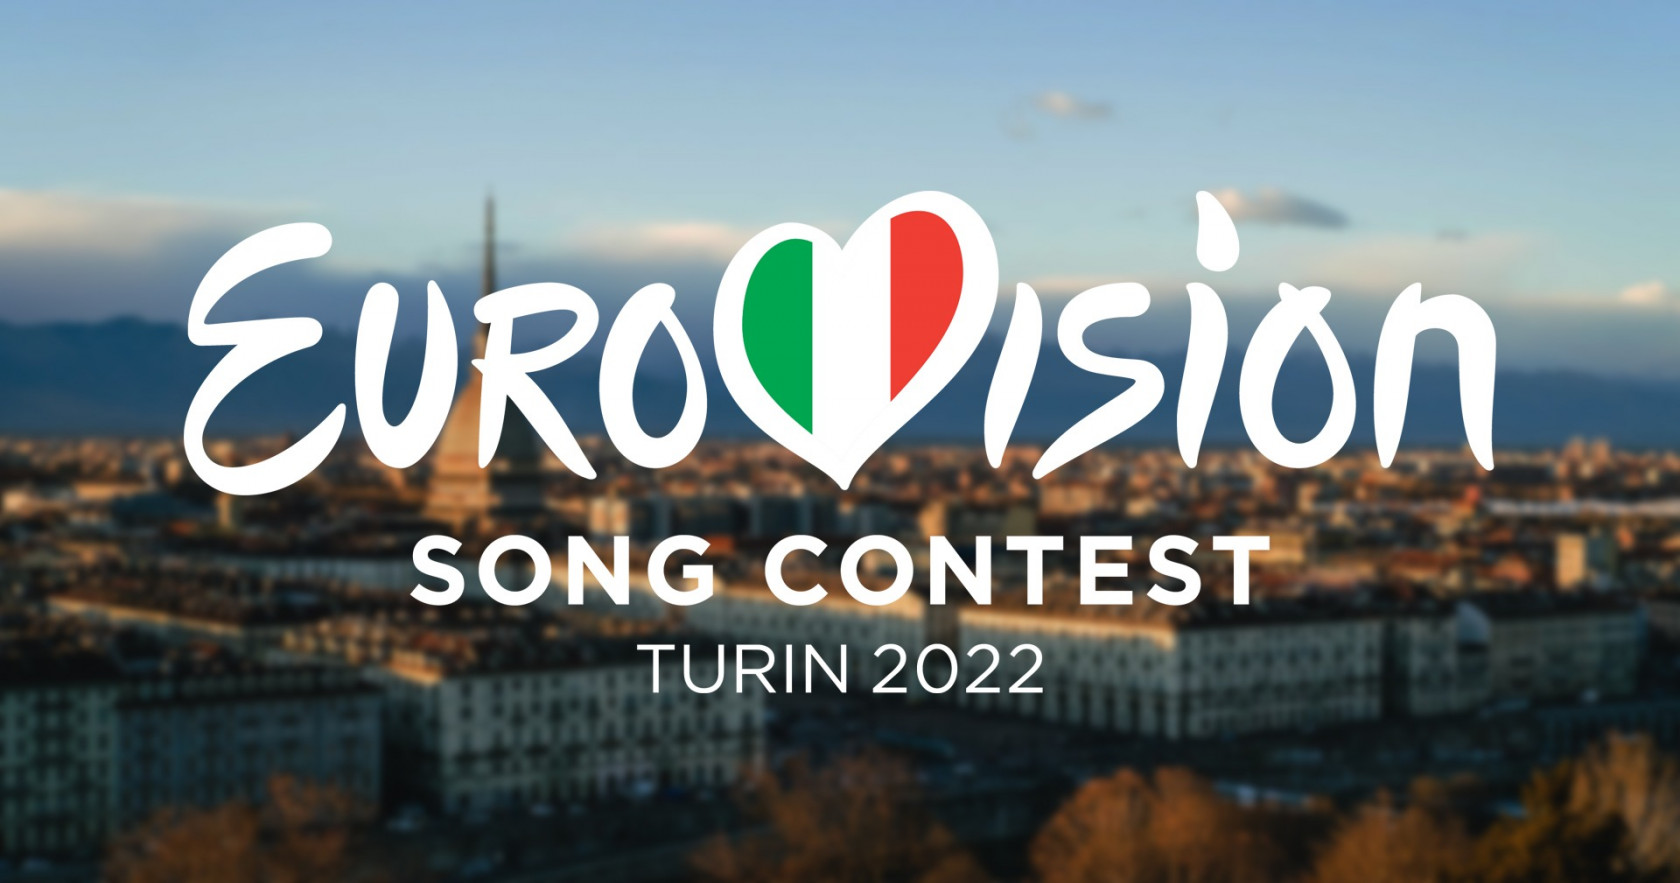 Turin, Italy, to host the 66th Eurovision Song Contest in May 2022